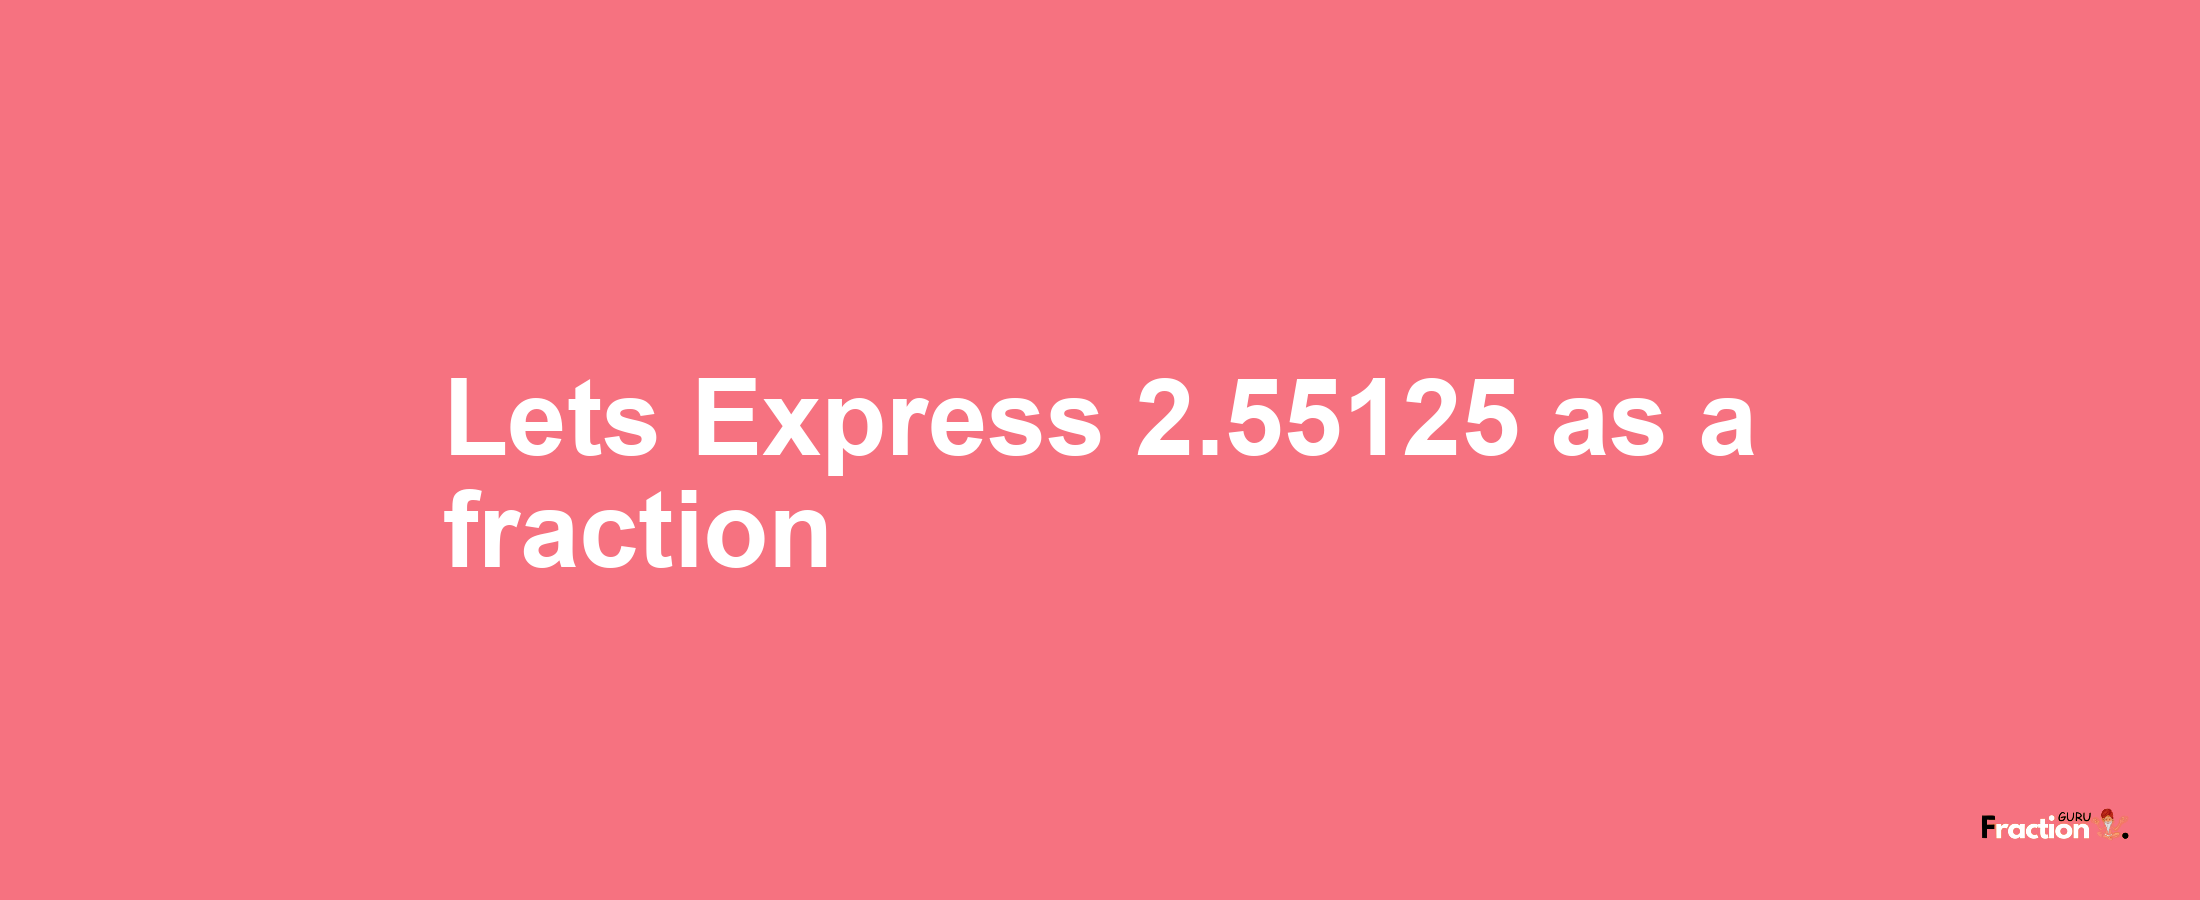 Lets Express 2.55125 as afraction